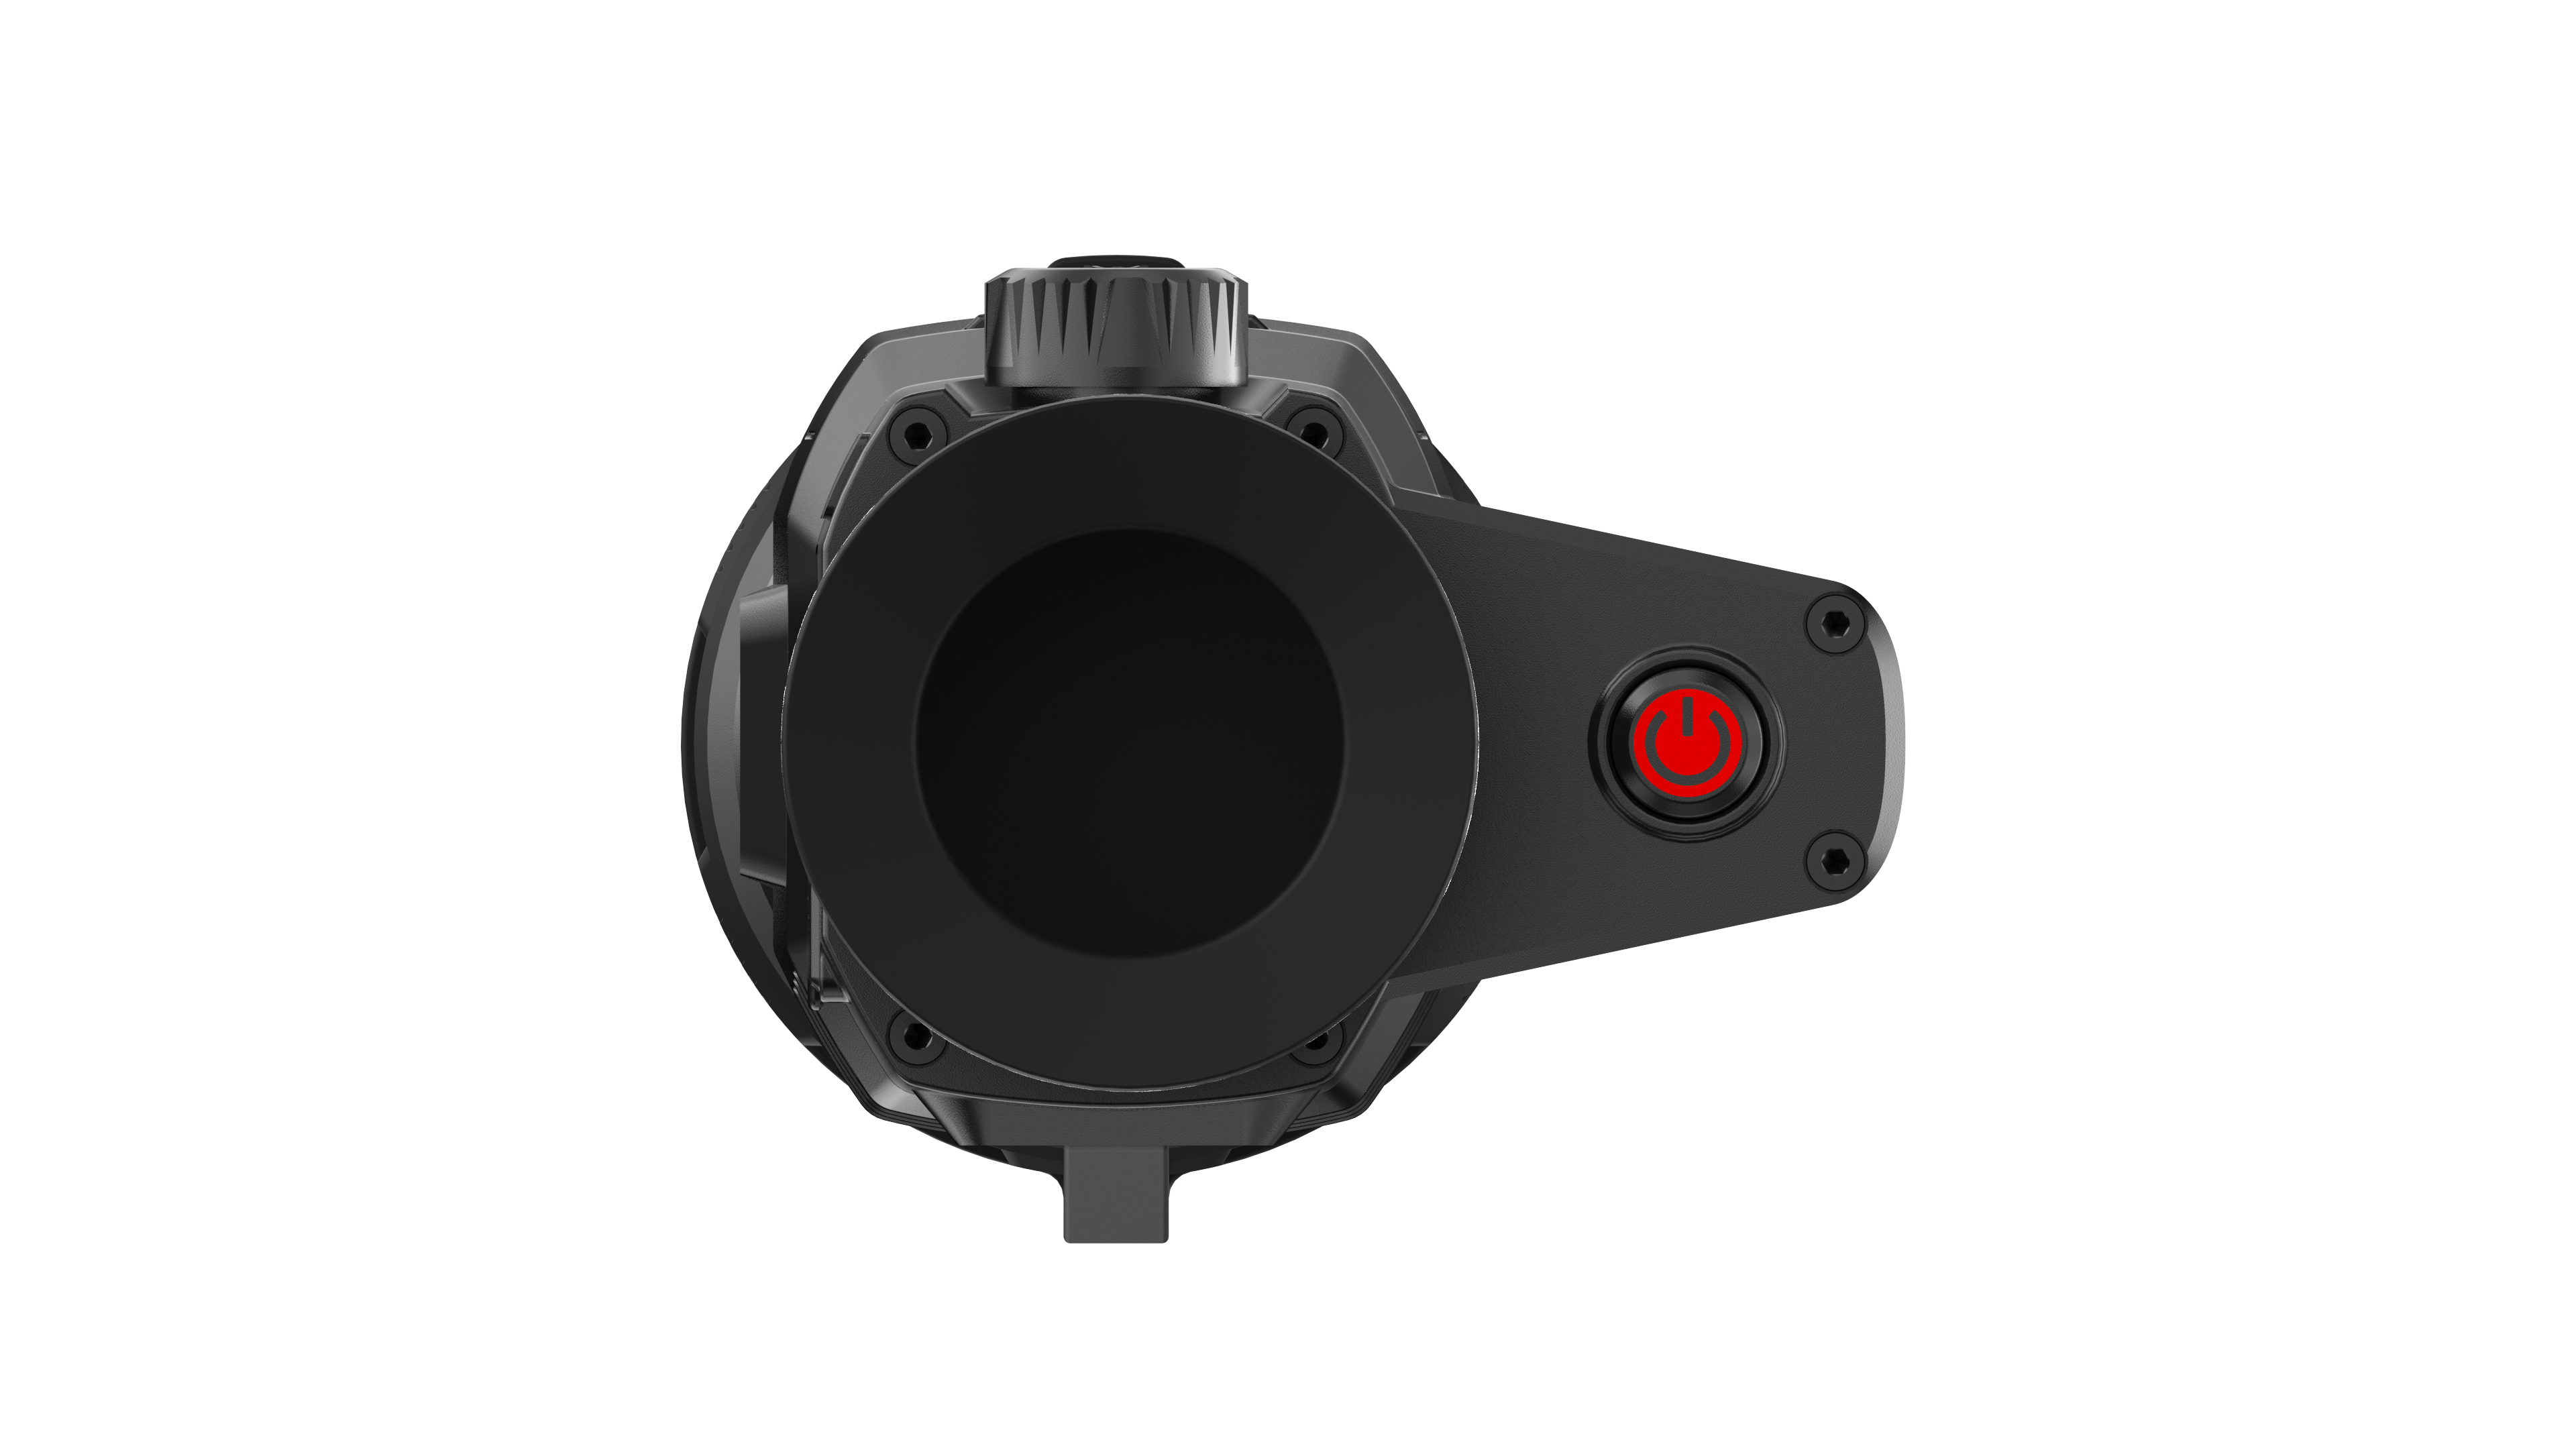 GUIDE Thermal Scope TR Series 384x288